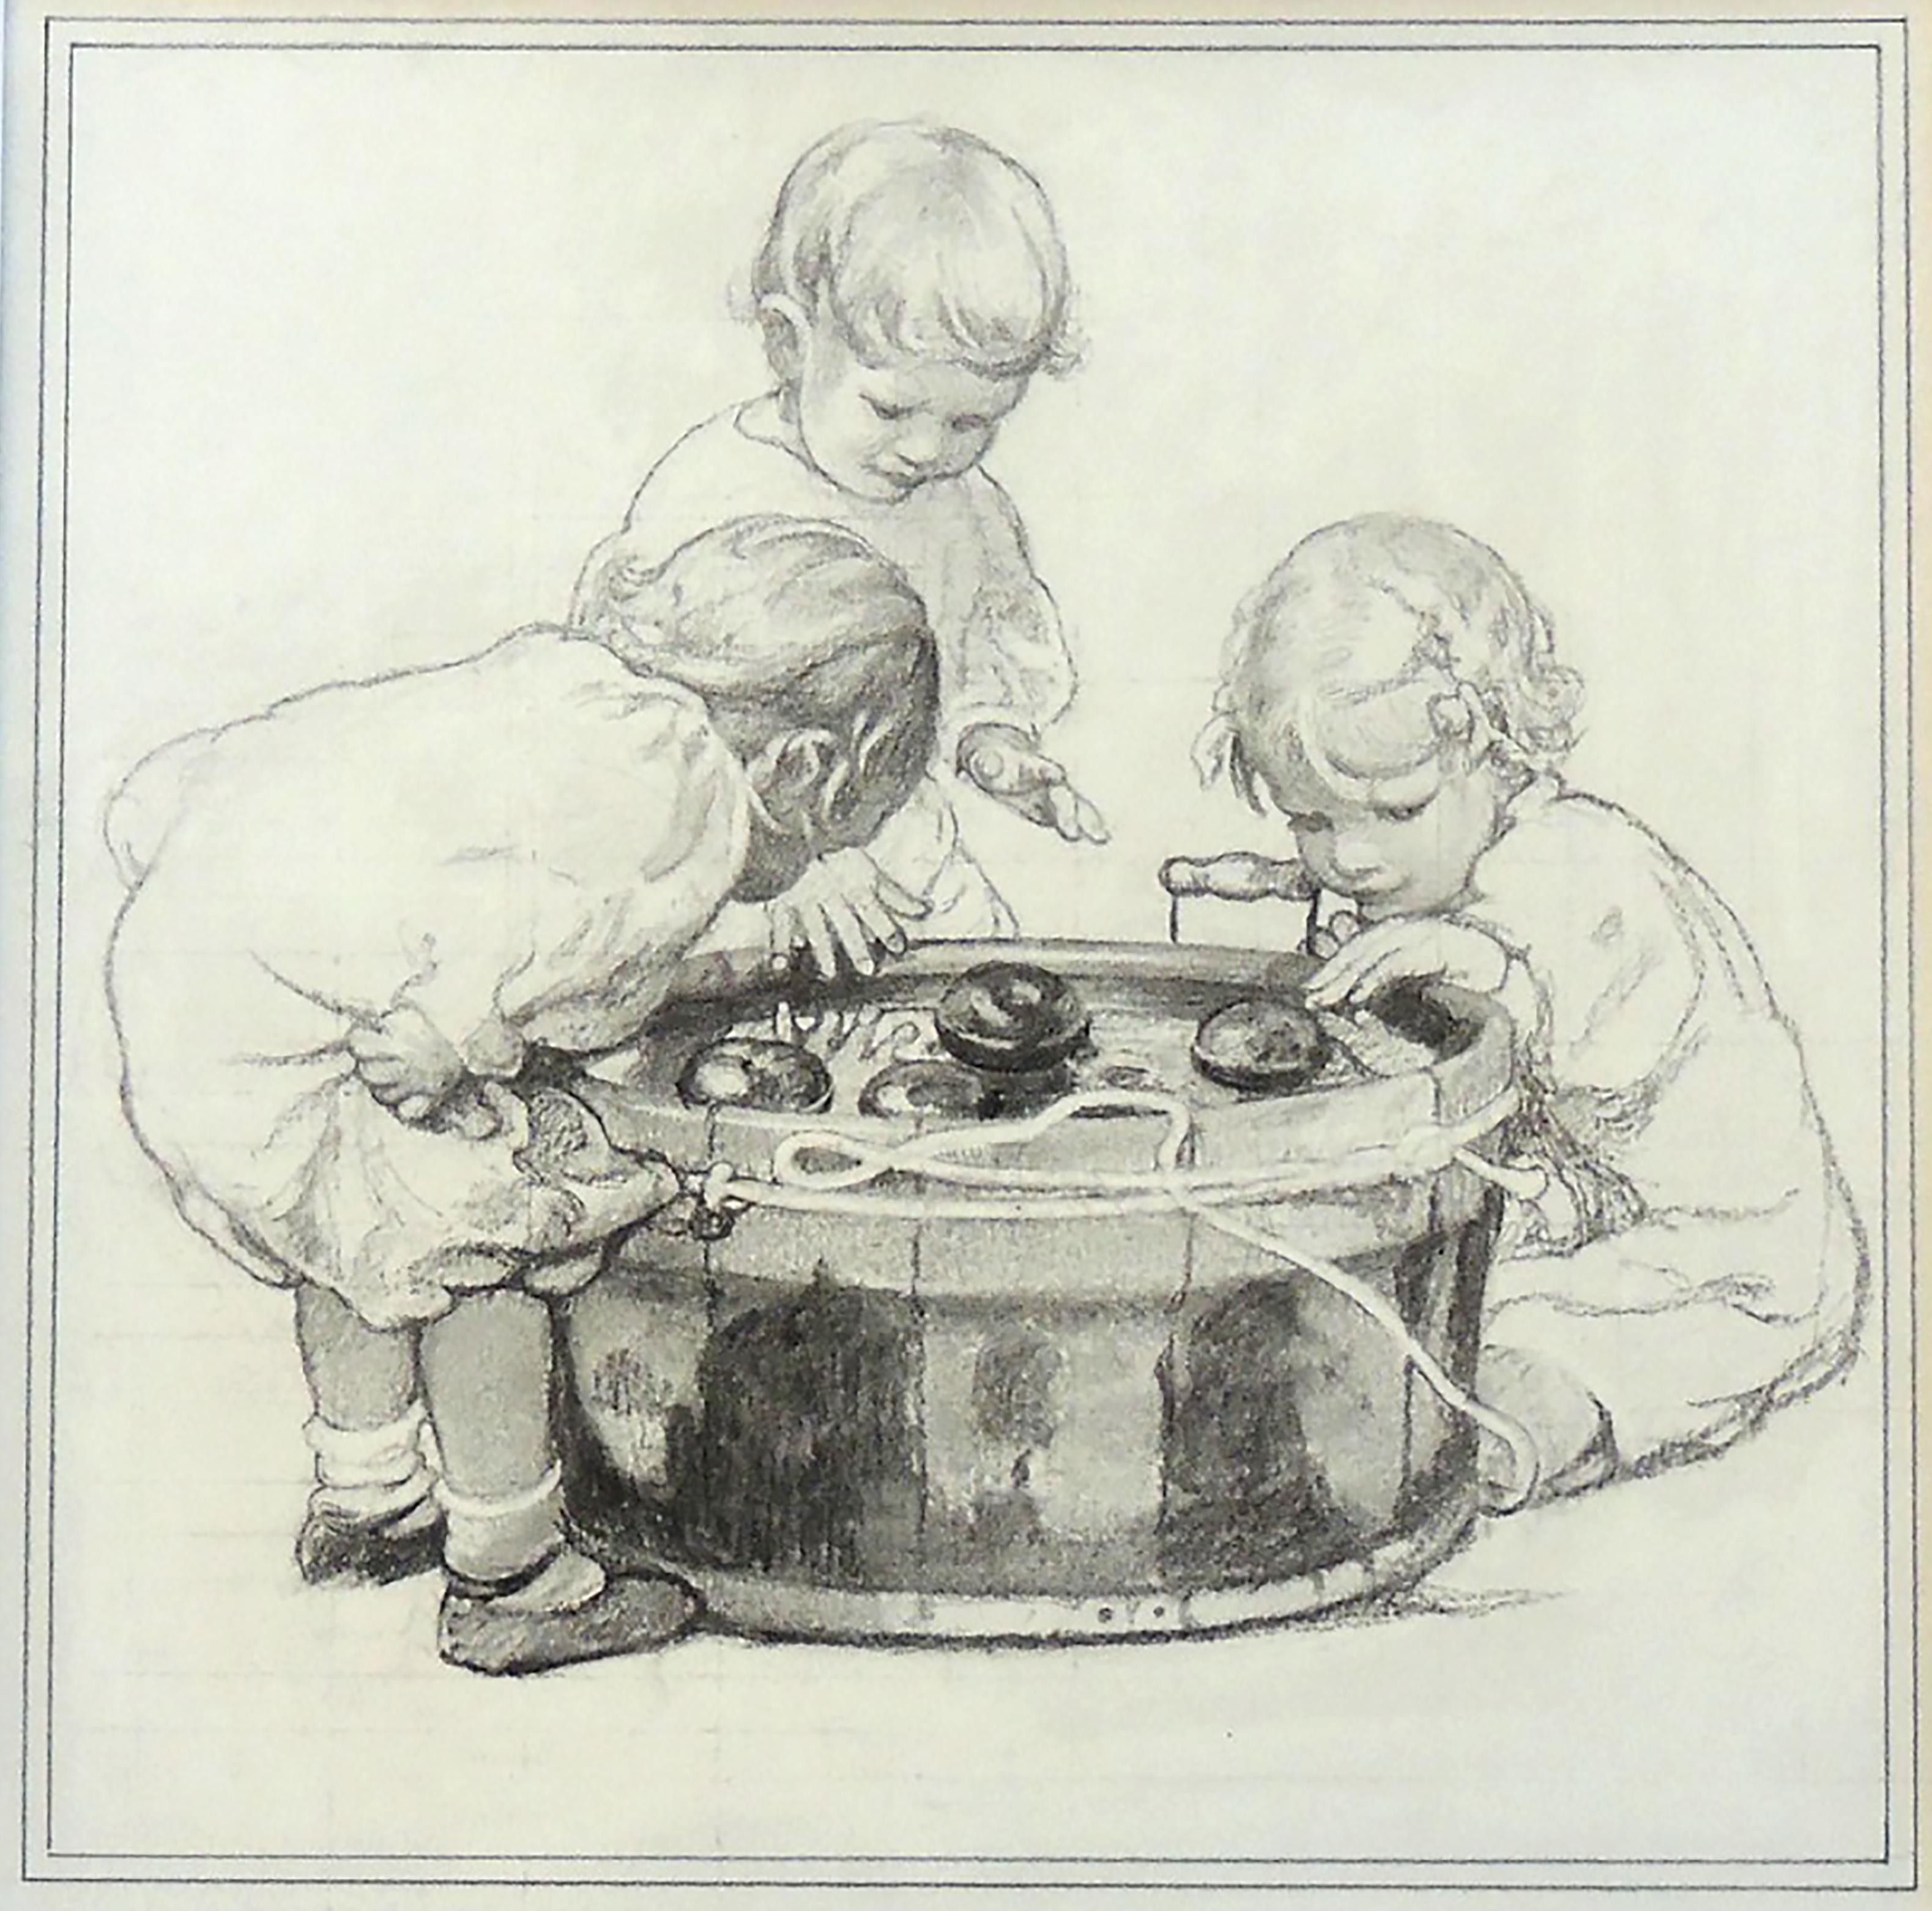 Bobbing for Apples - Painting by Jessie Willcox Smith